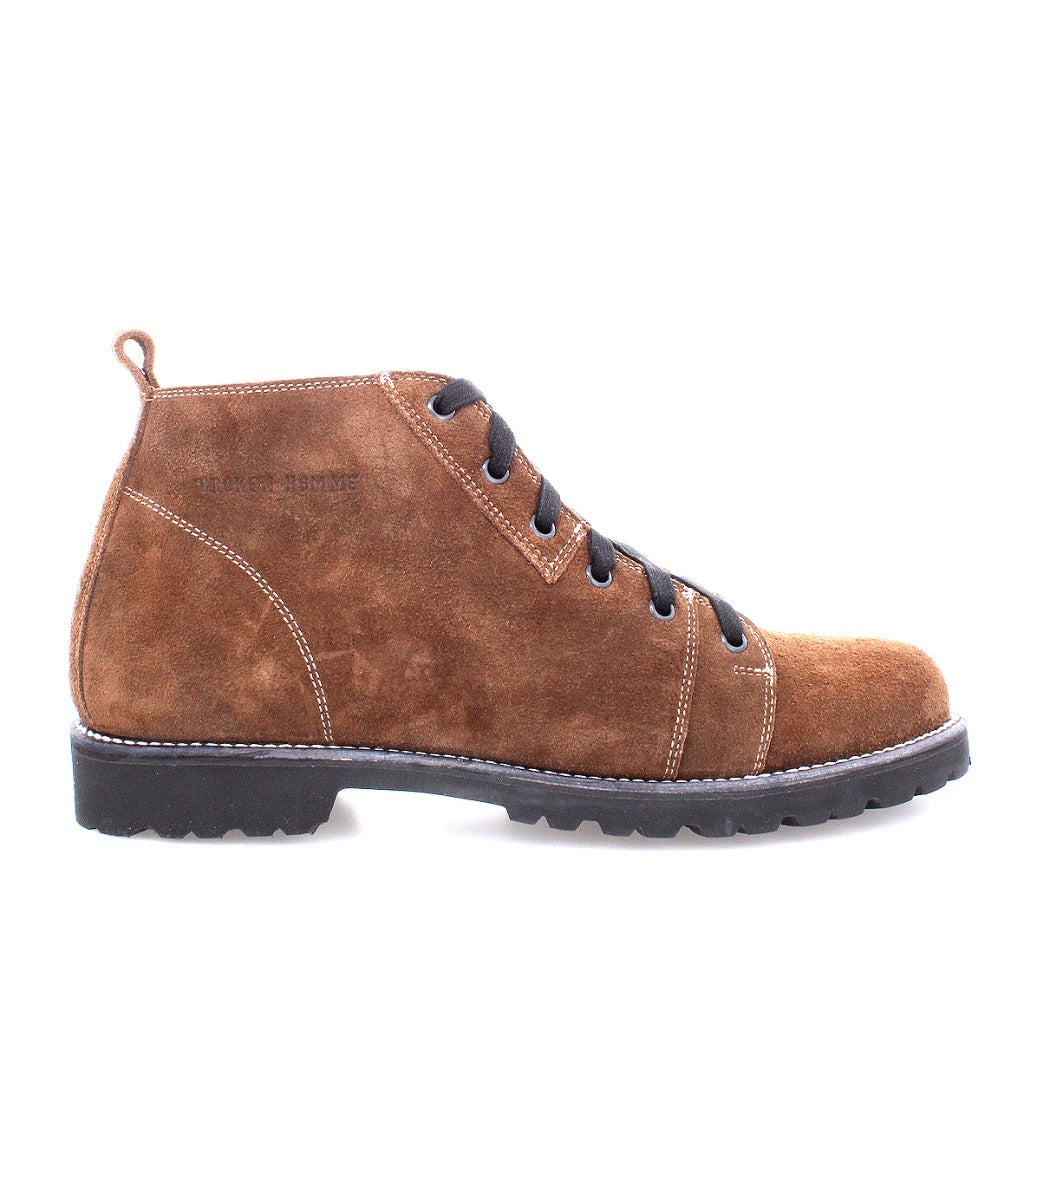 A men's brown suede cross over Parker Boot with Vibram Lug hiking outsole by Broken Homme.